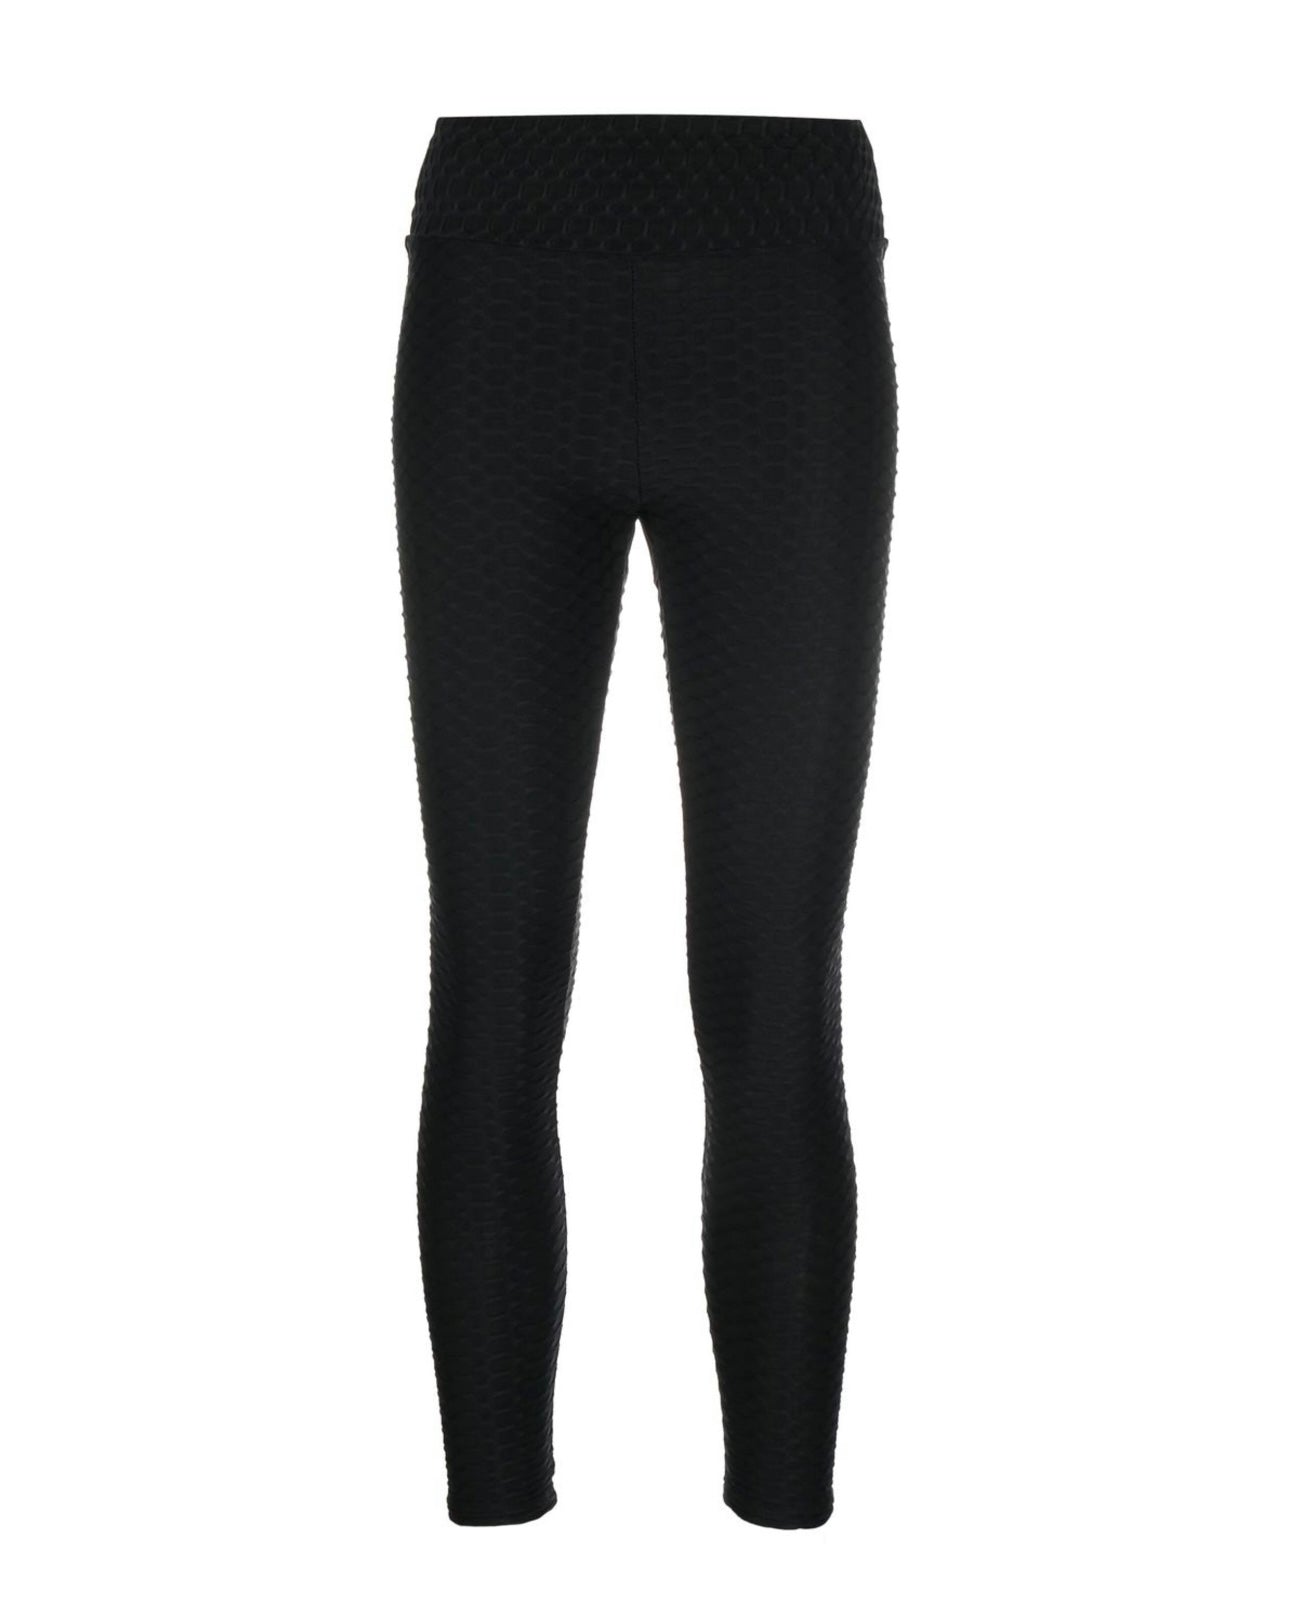 304 Clothing, TOF Core Ribbed Seamless 3D Fit Legging Black, Black